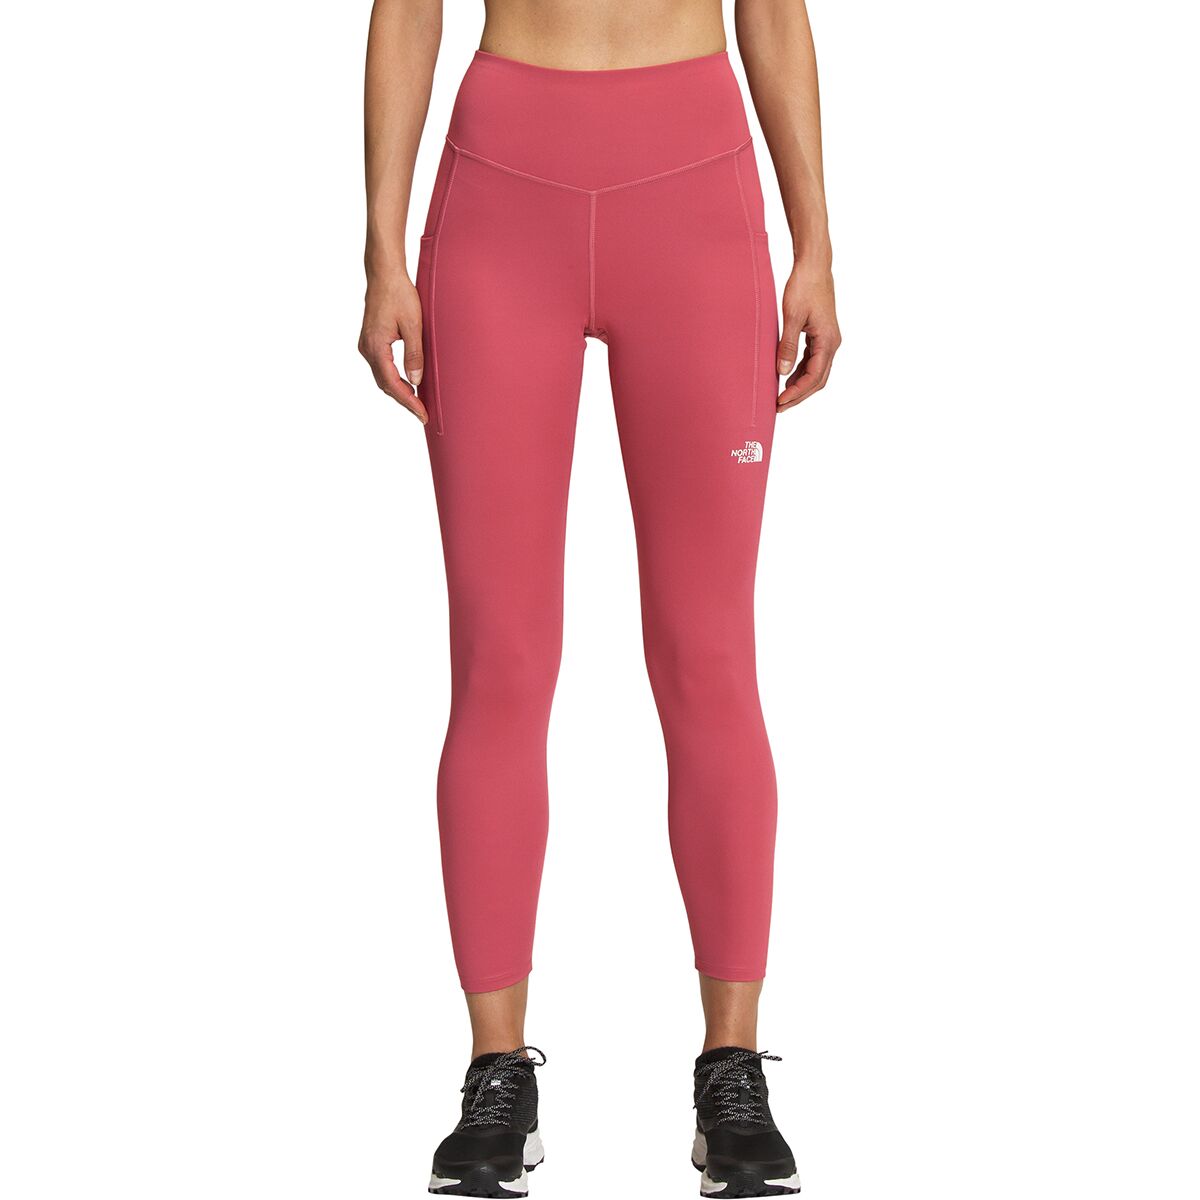 The North Face Printed Midline High Rise Pocket 7/8 Leggings